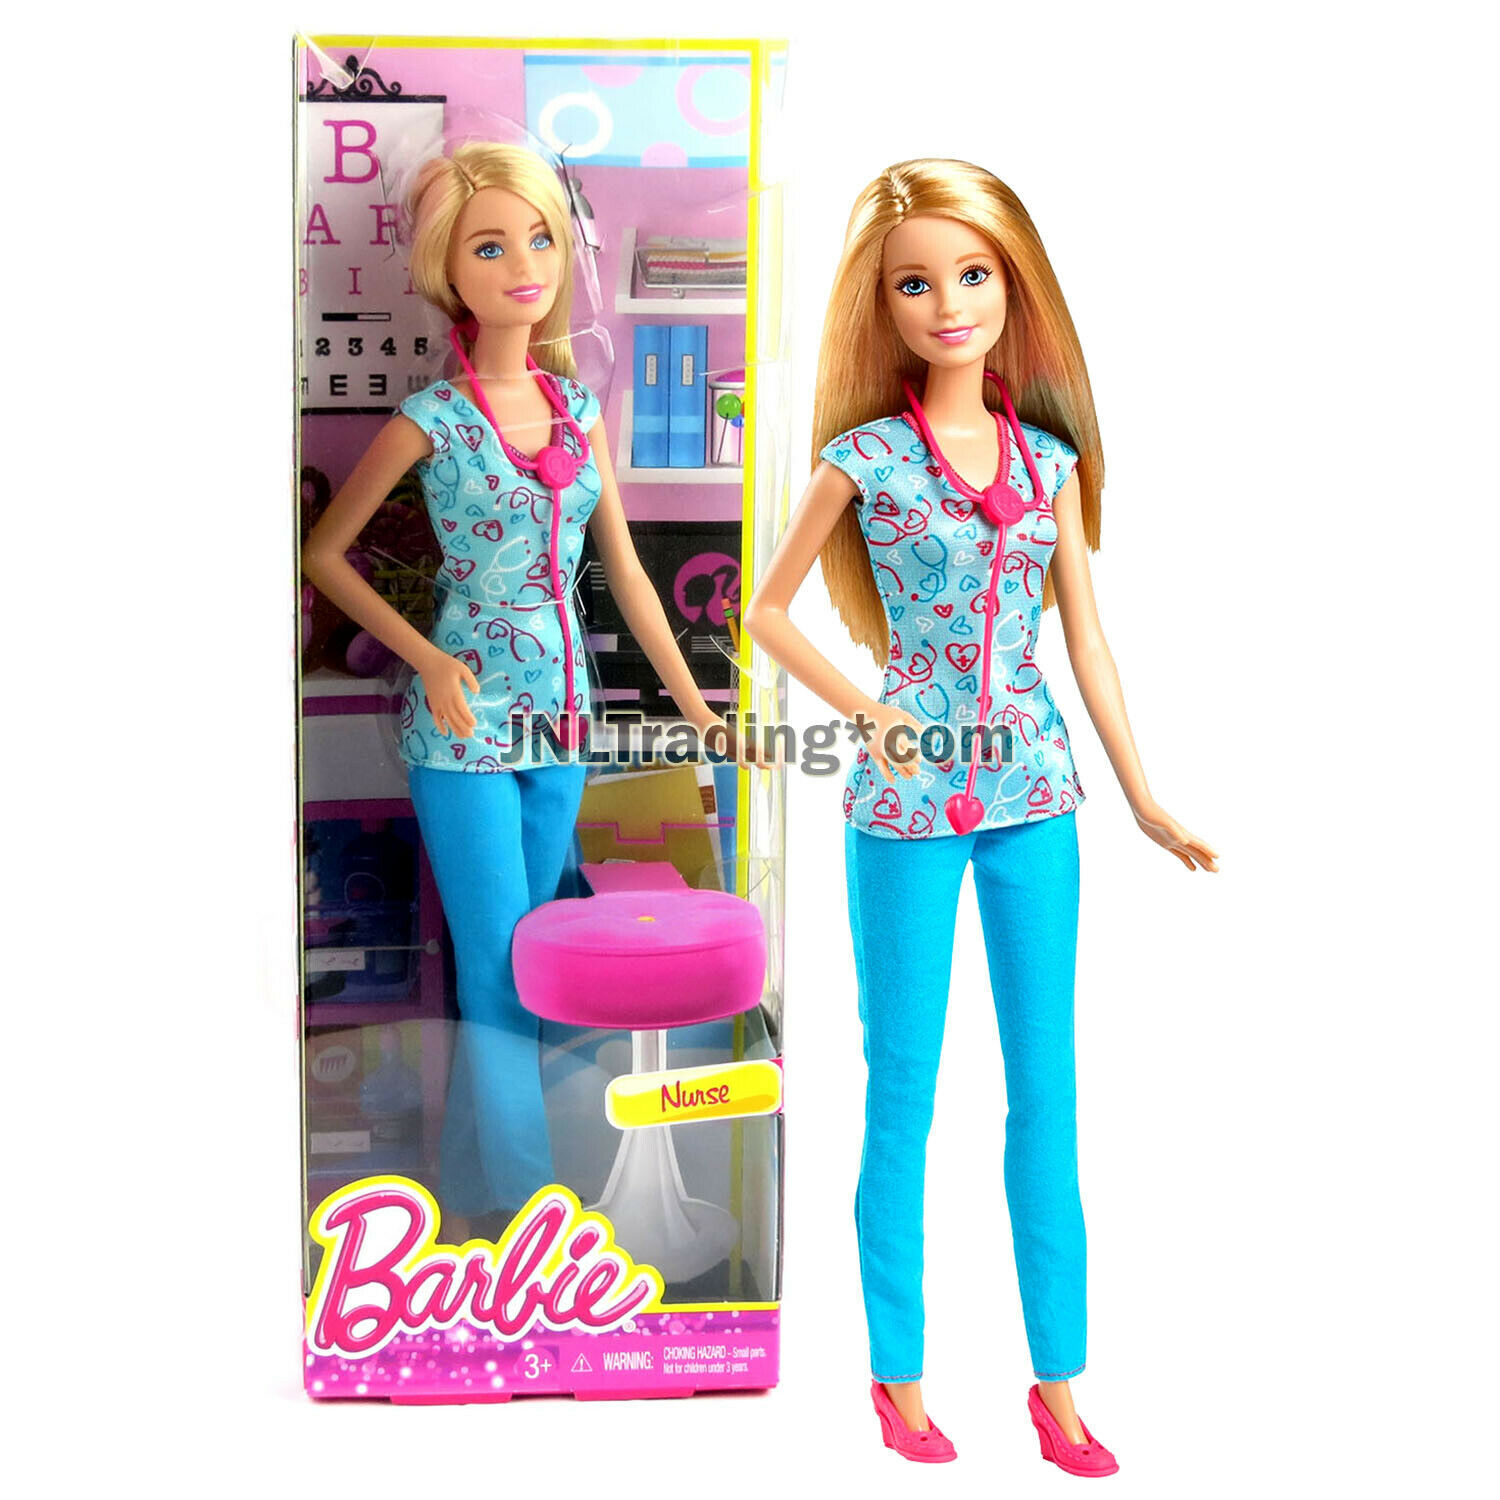 Primary image for Year 2014 Barbie Career Series 12 Inch Doll - NURSE DGG41 with Stethoscope